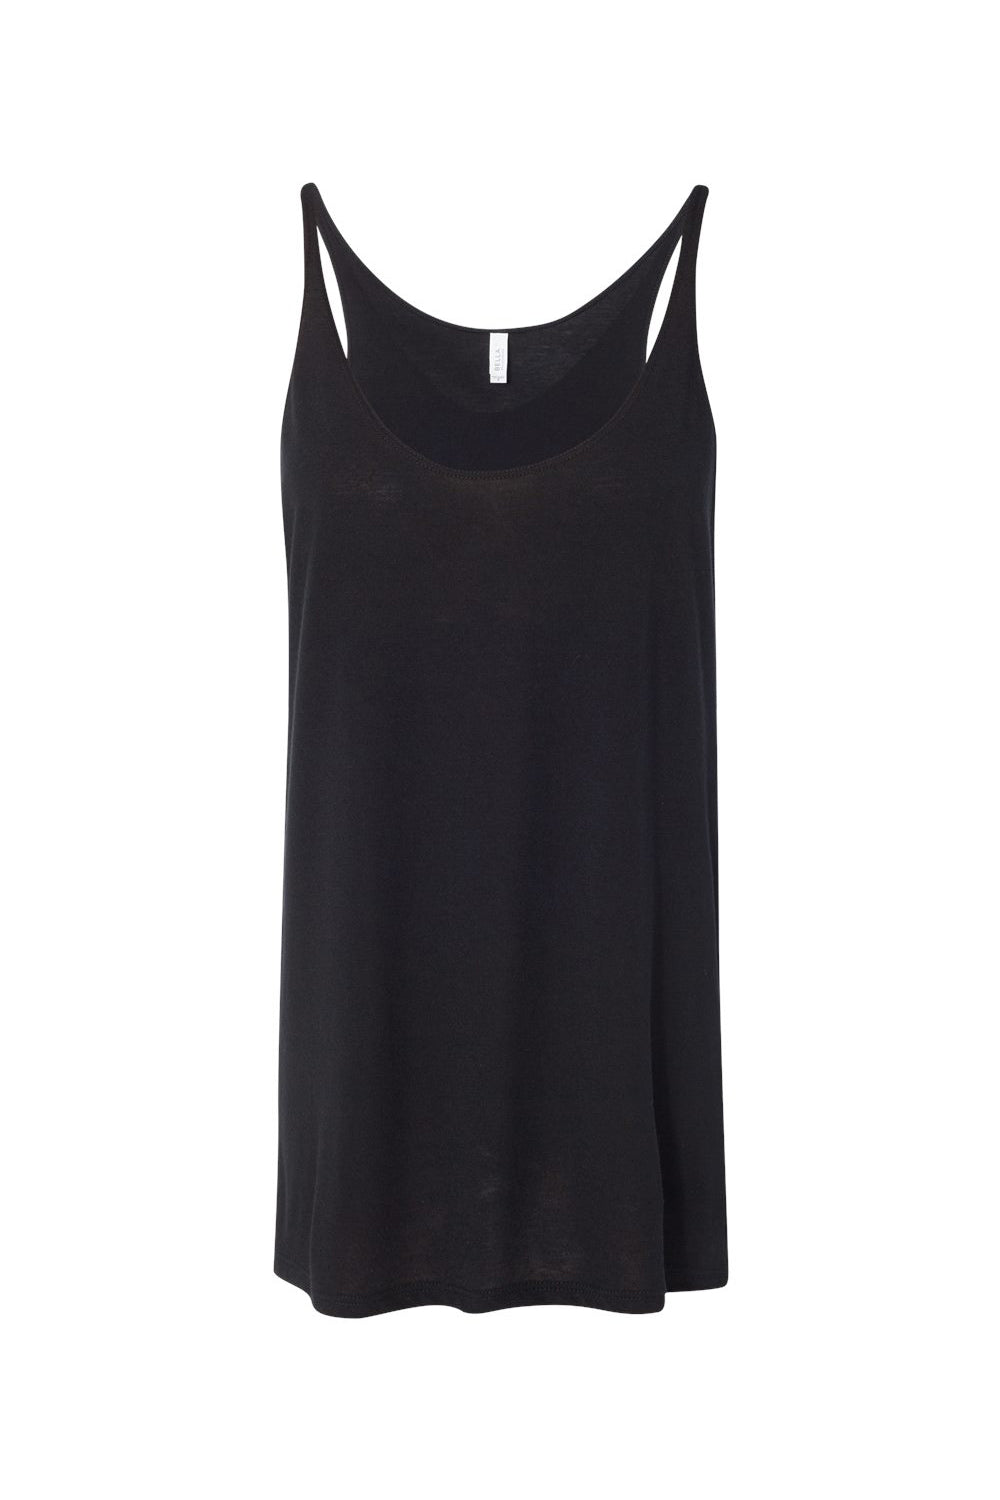 Bella + Canvas 8838 Womens Slouchy Tank Top Black Flat Front